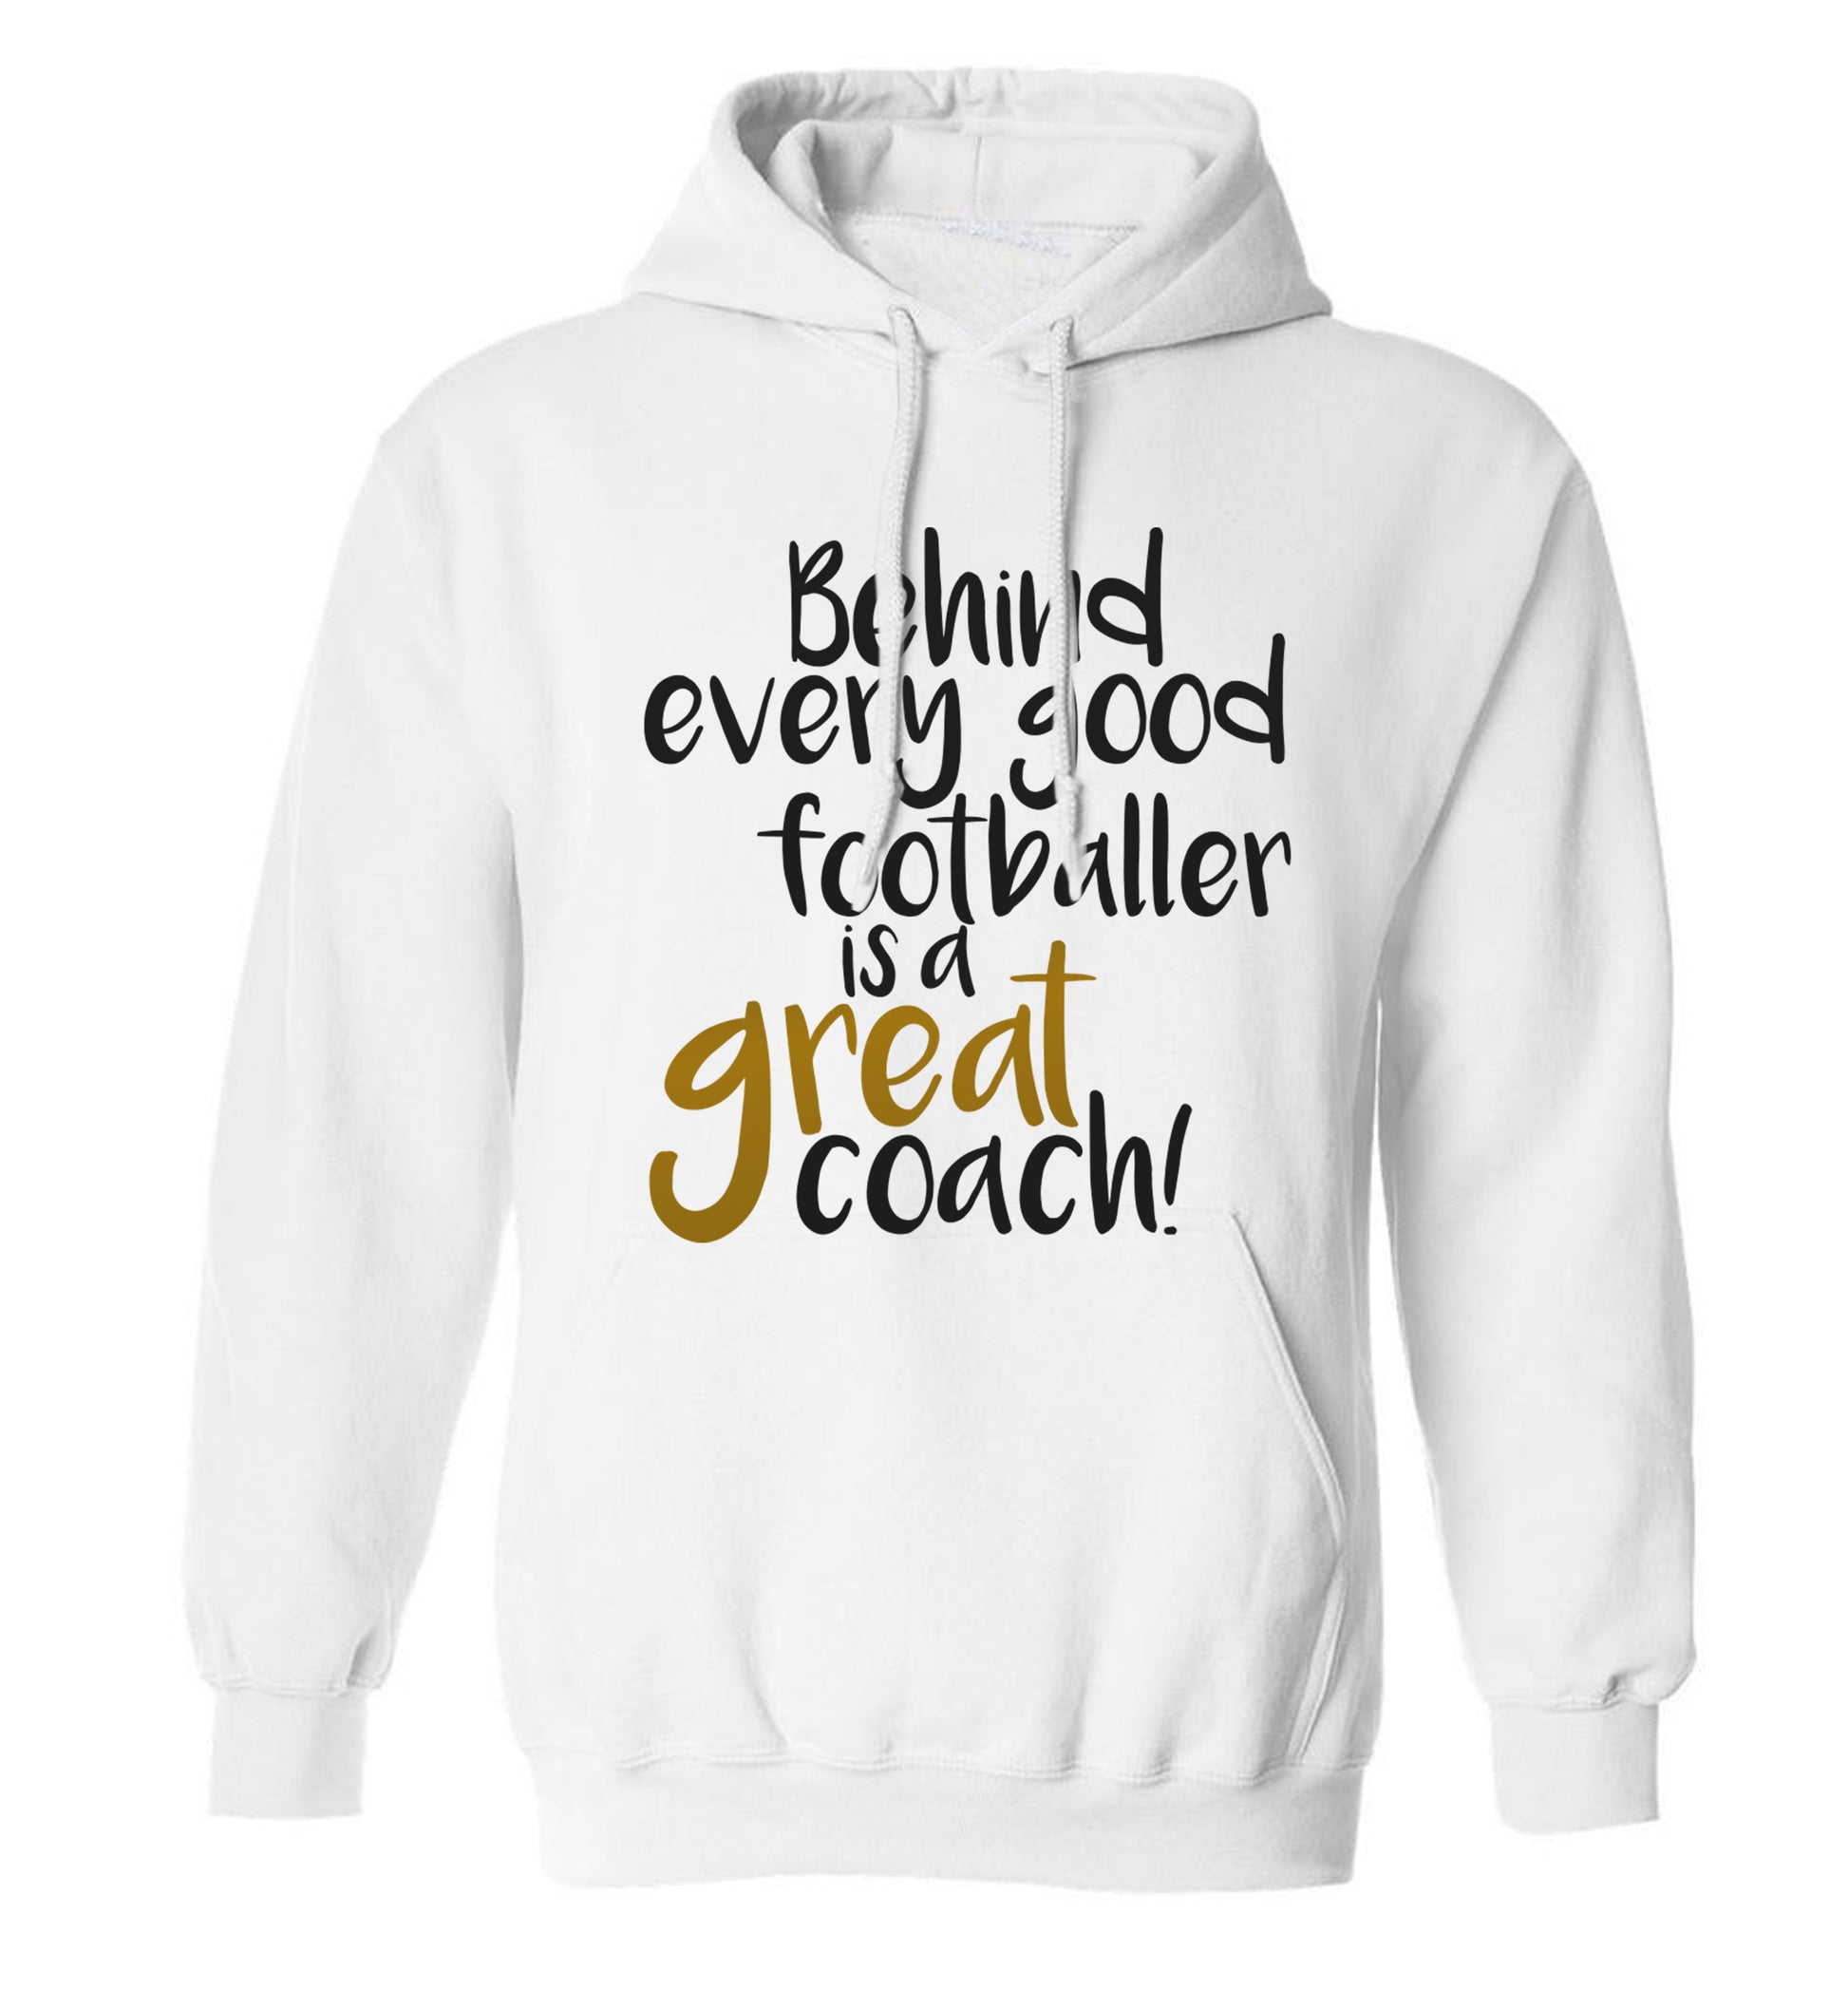 Behind every good footballer is a great coach! adults unisexwhite hoodie 2XL